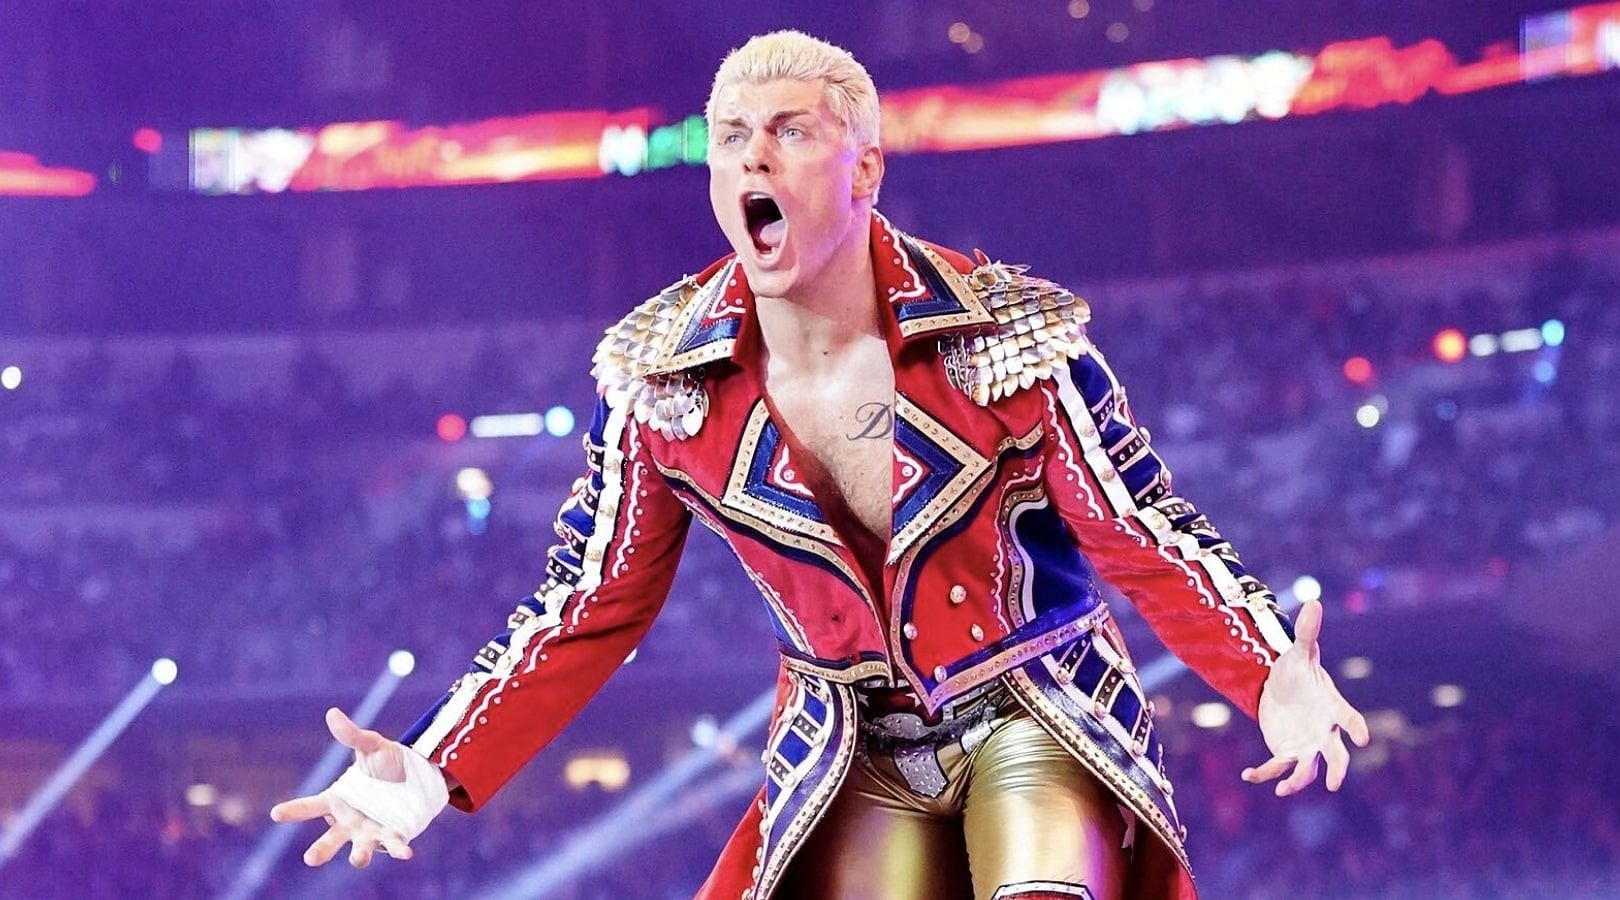 Cody Rhodes has taken over WWE since his return